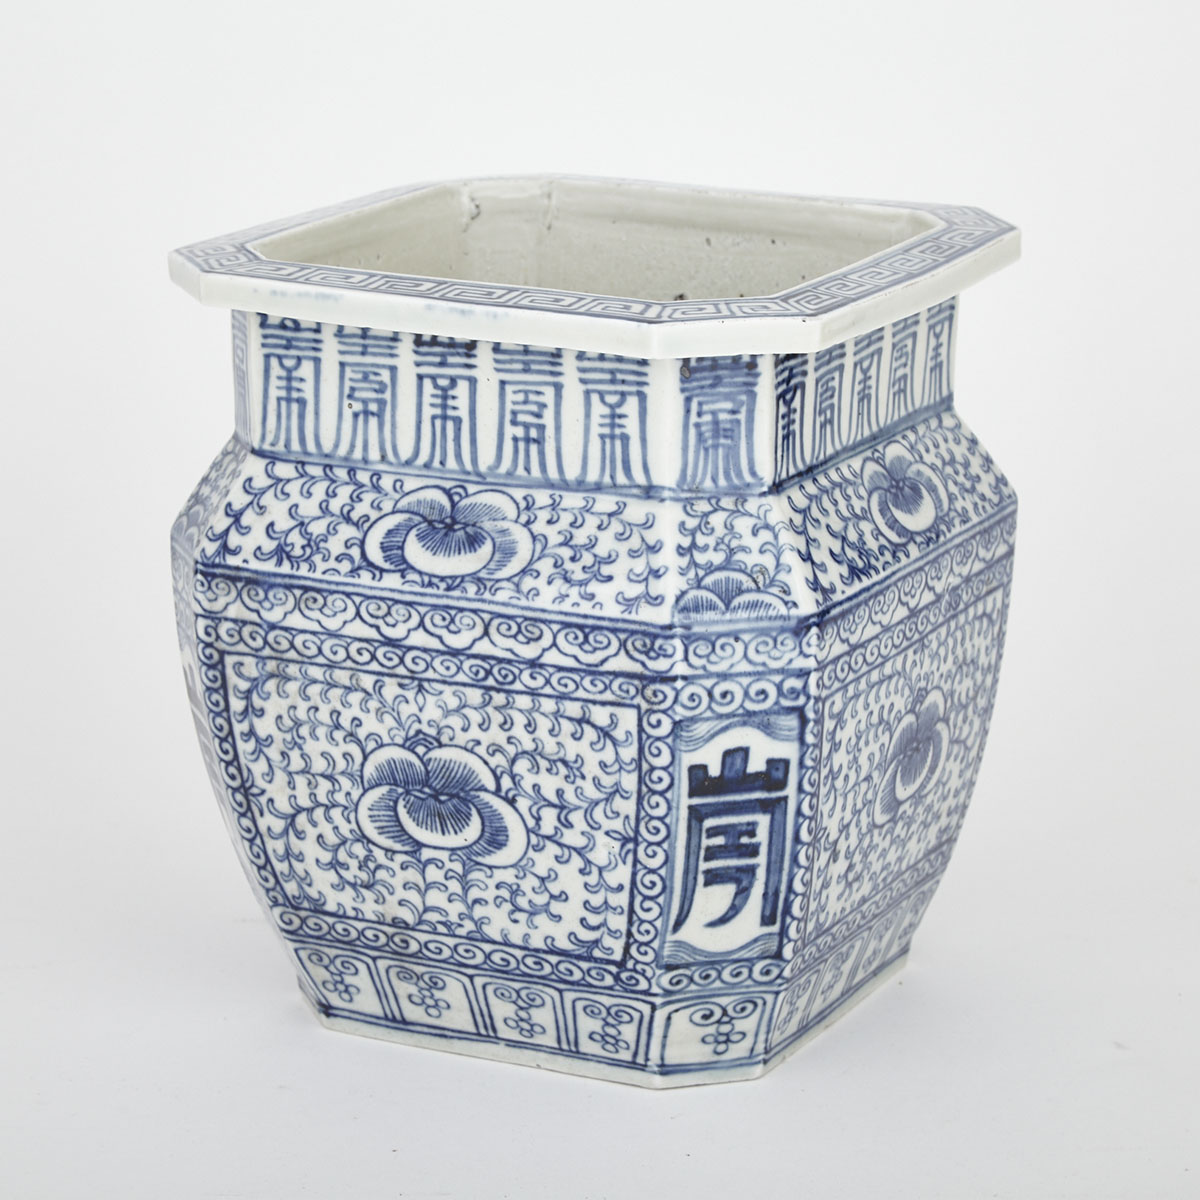 Chinese Blue and White Porcelain Square Planter, early 20th century